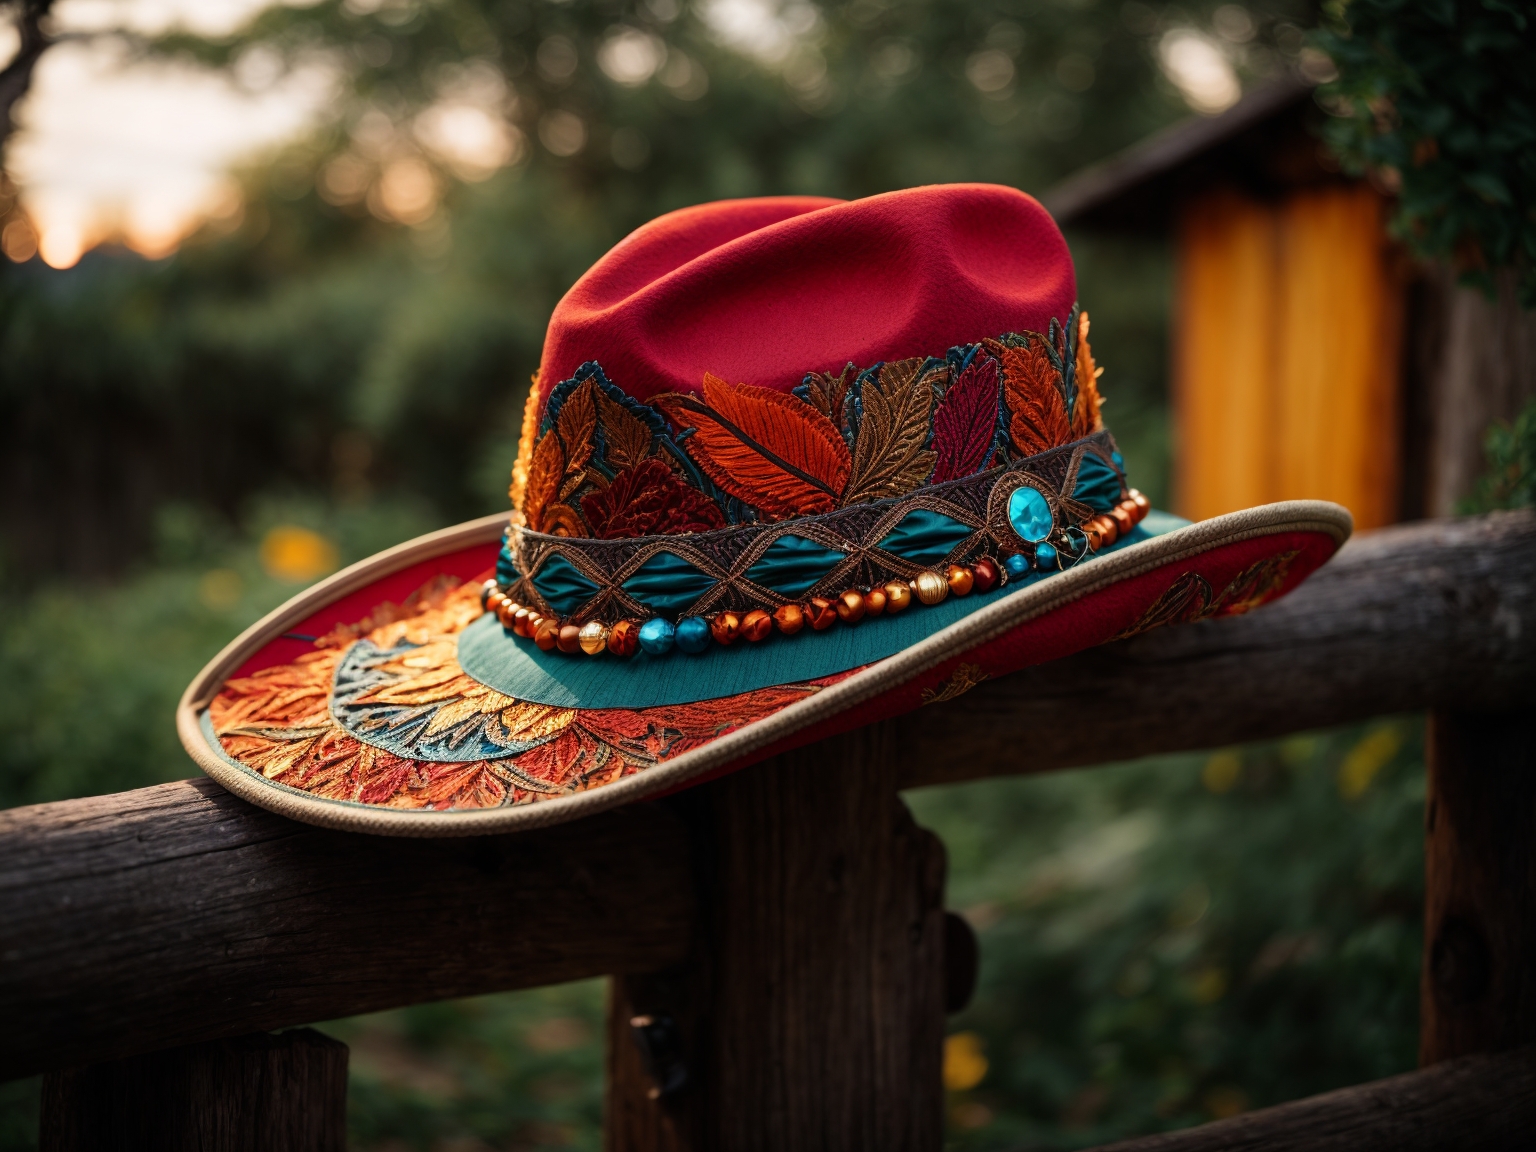 A very ornate and far from simple safari hat